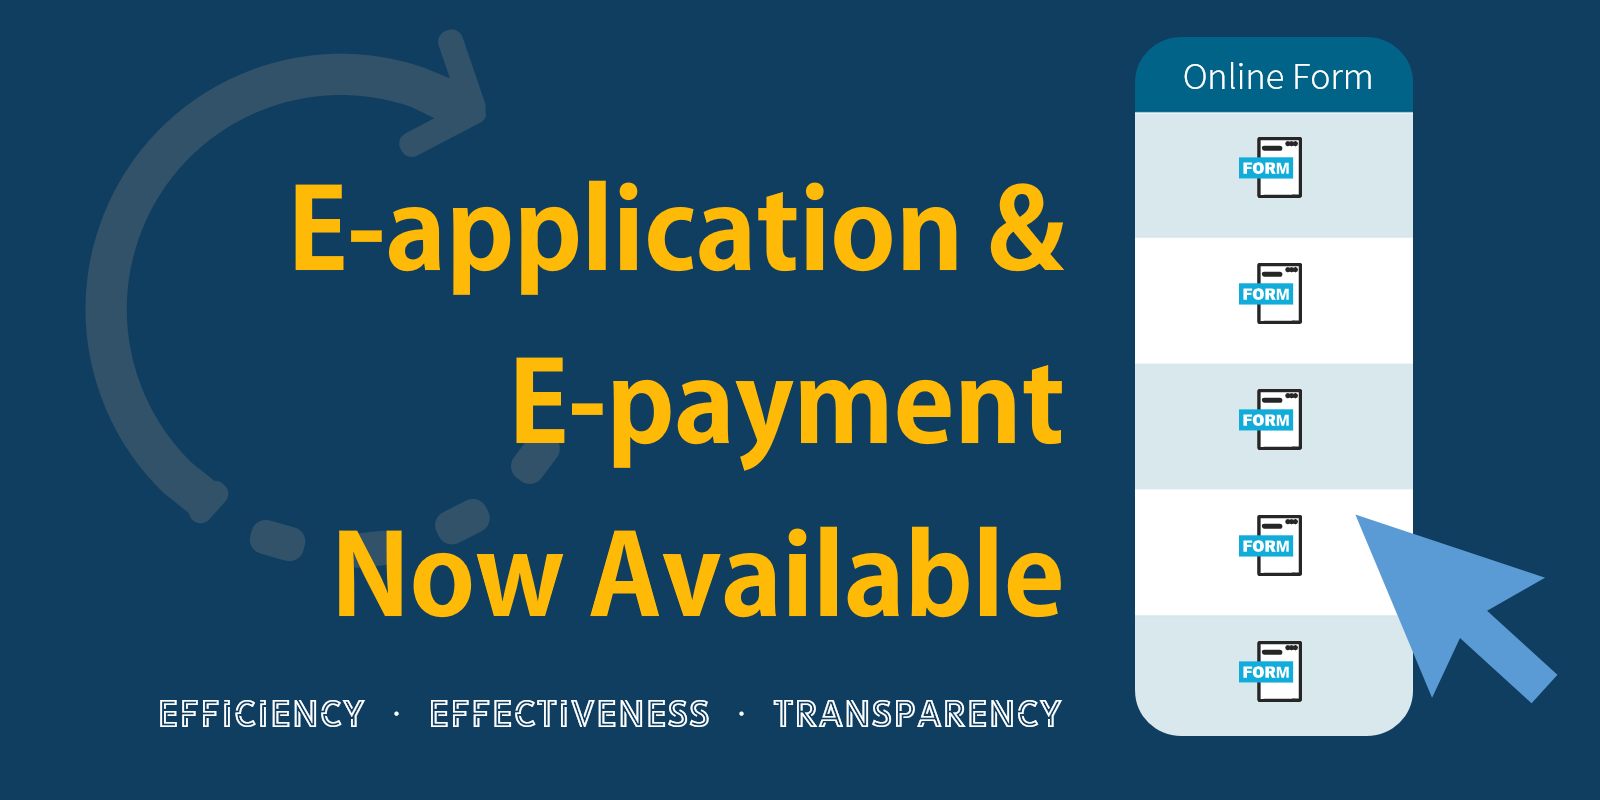 E-application & E-payment Now Available